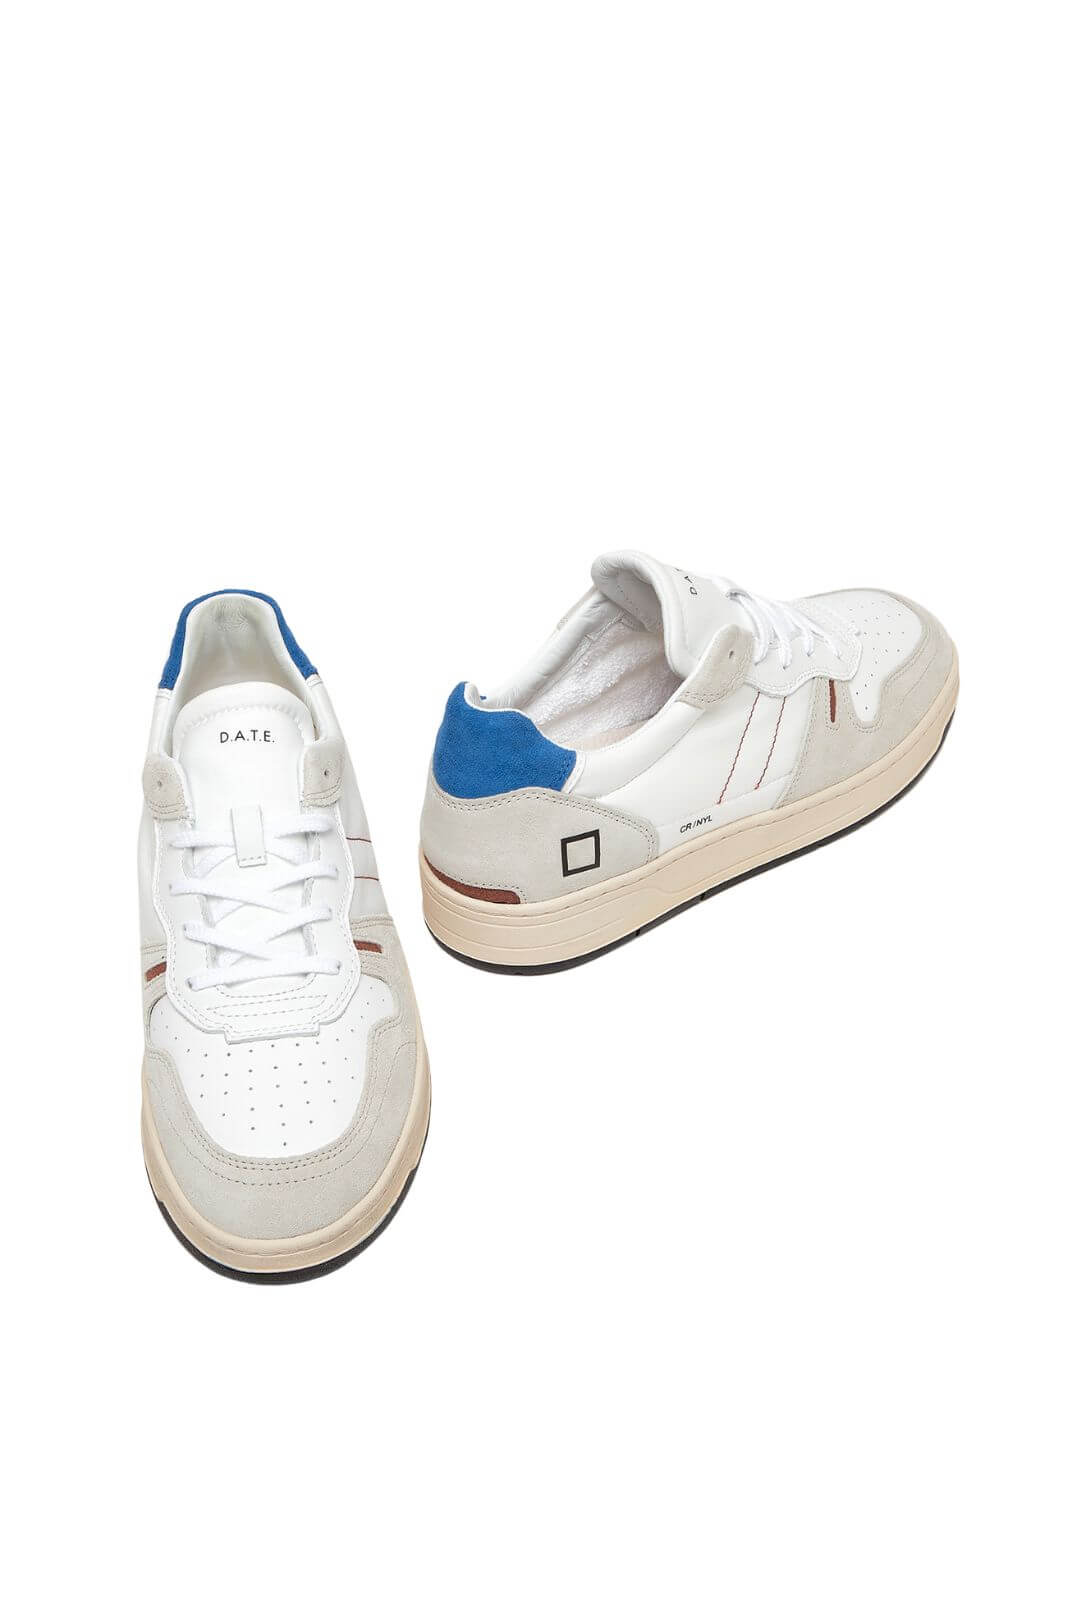 DATE sneakers uomo COURT 2.0